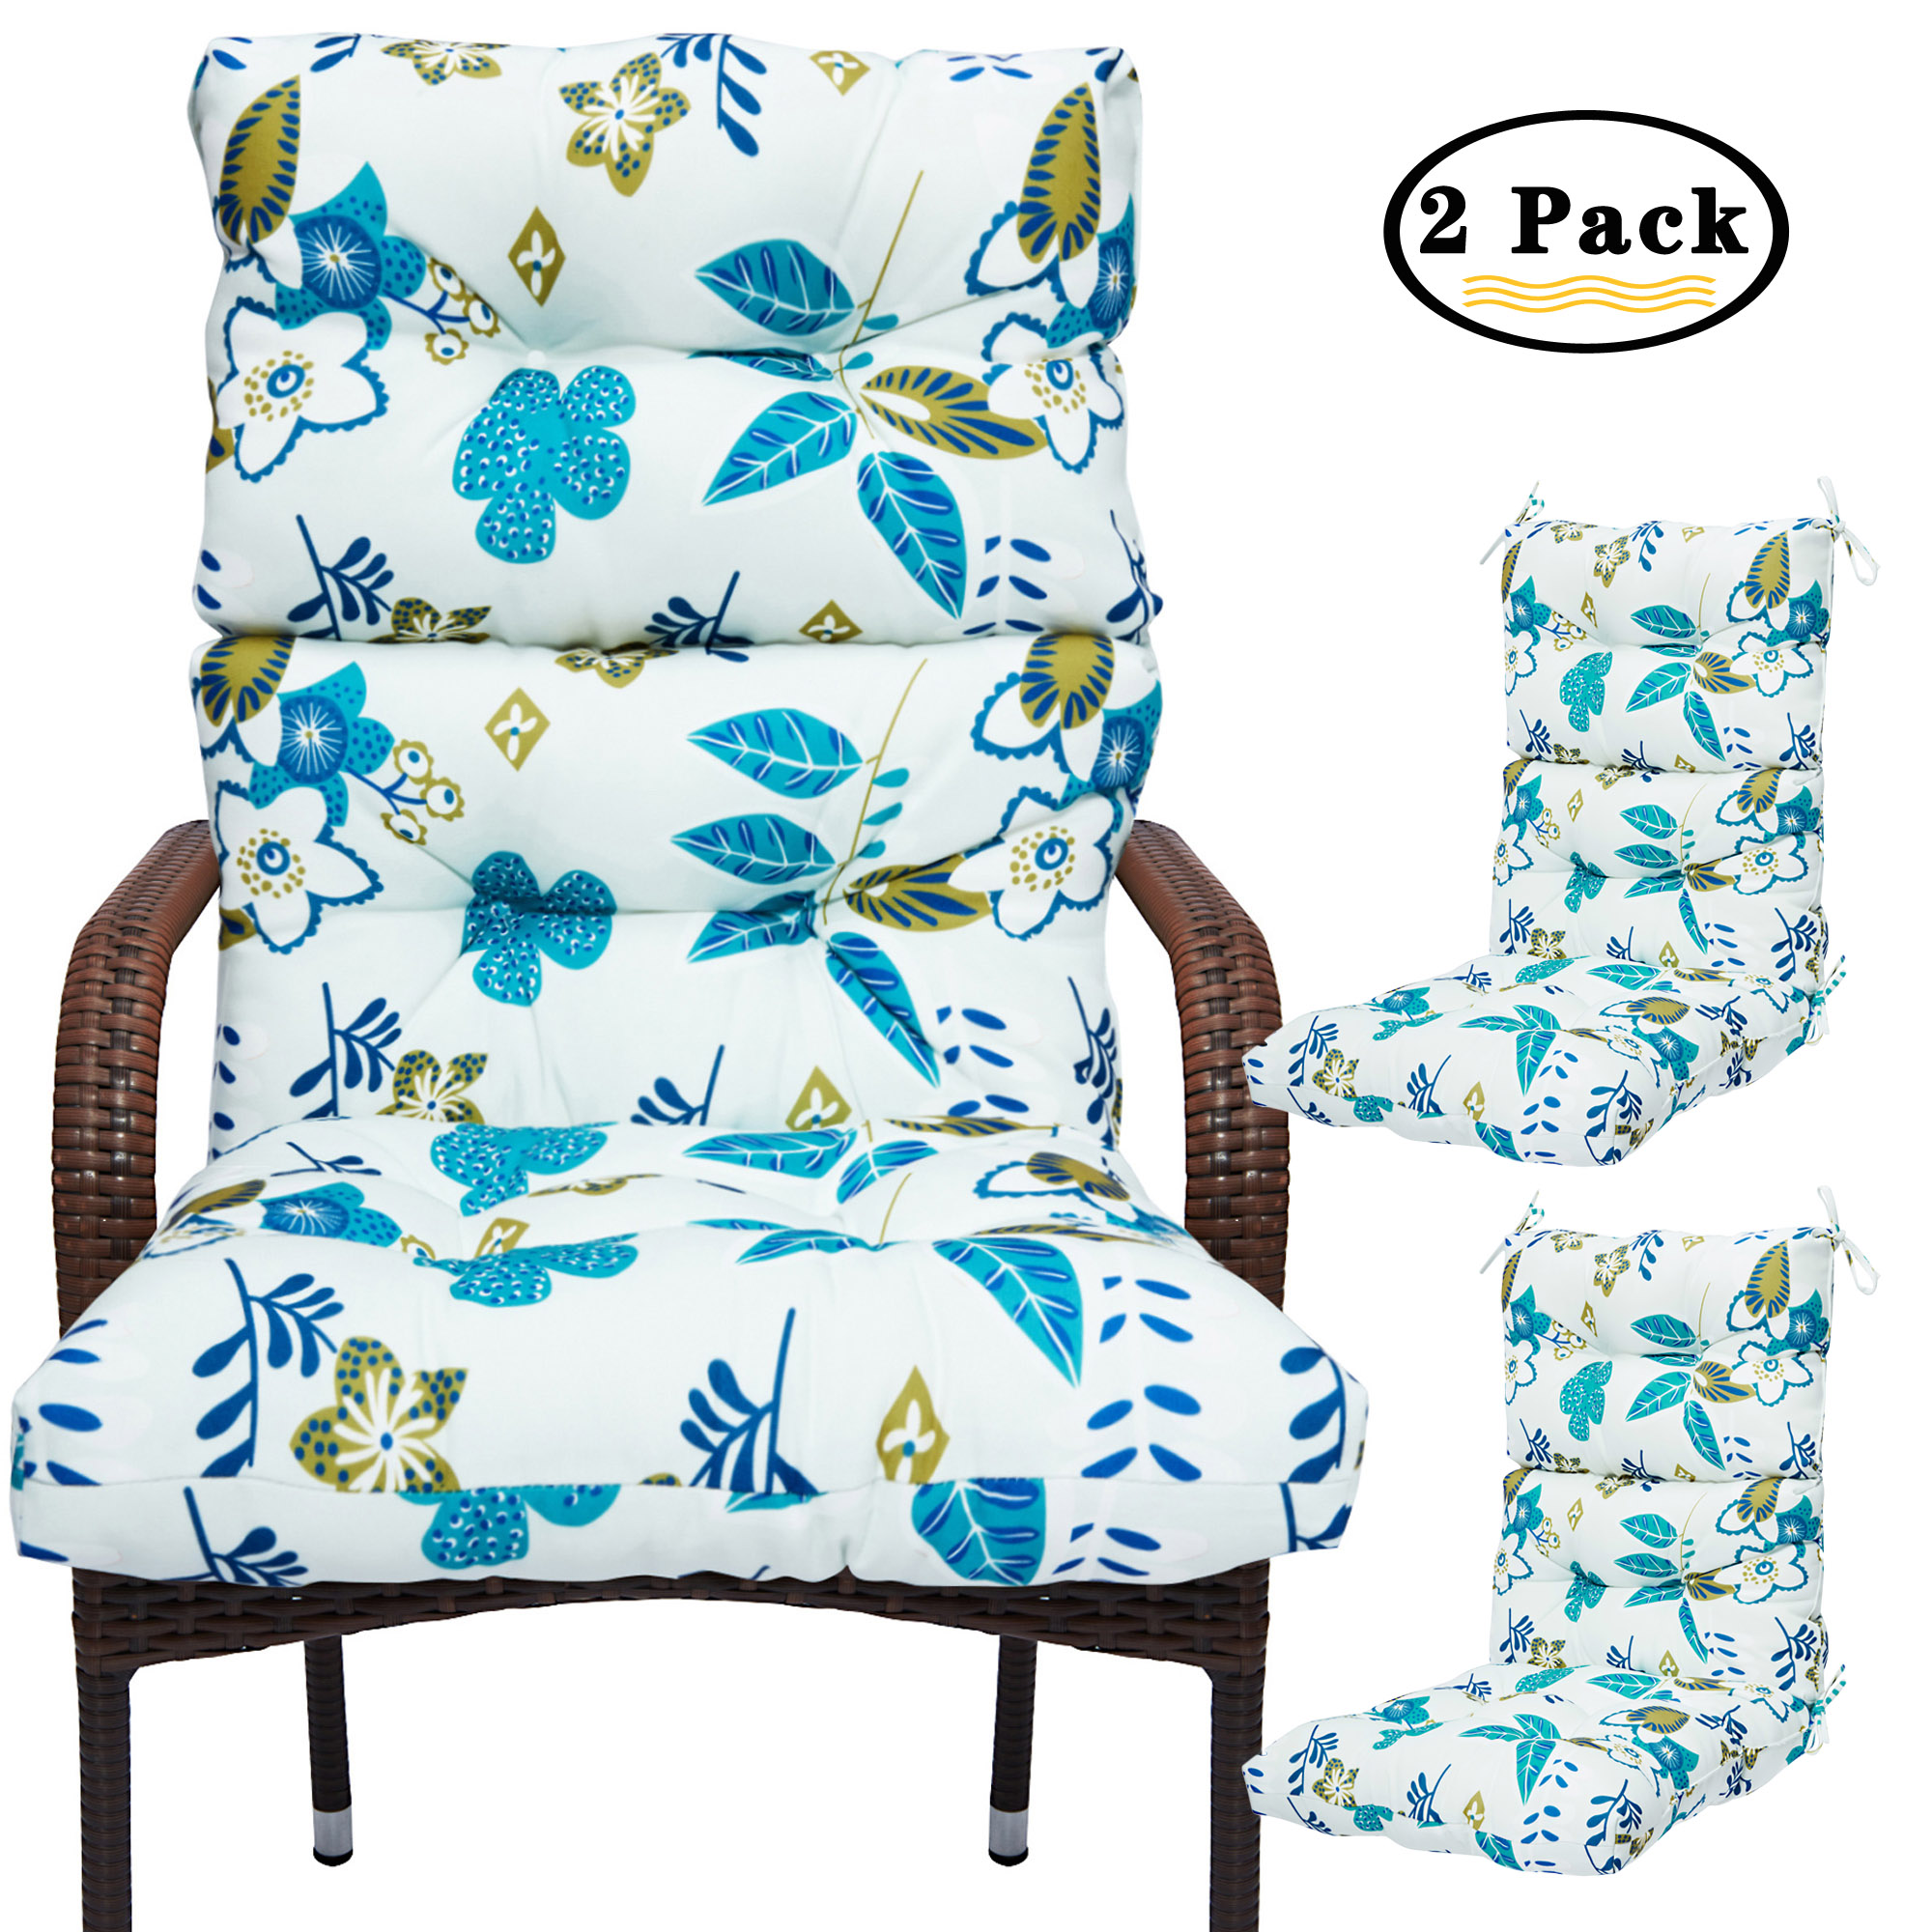 SAYFUT Rocking Chair Cushions and Pads, Back and Seat Cushion for Outdoor, Patio chair, Office chair, Desk chair, Dining chairs, Kitchen chair, Lounge chair - image 2 of 6